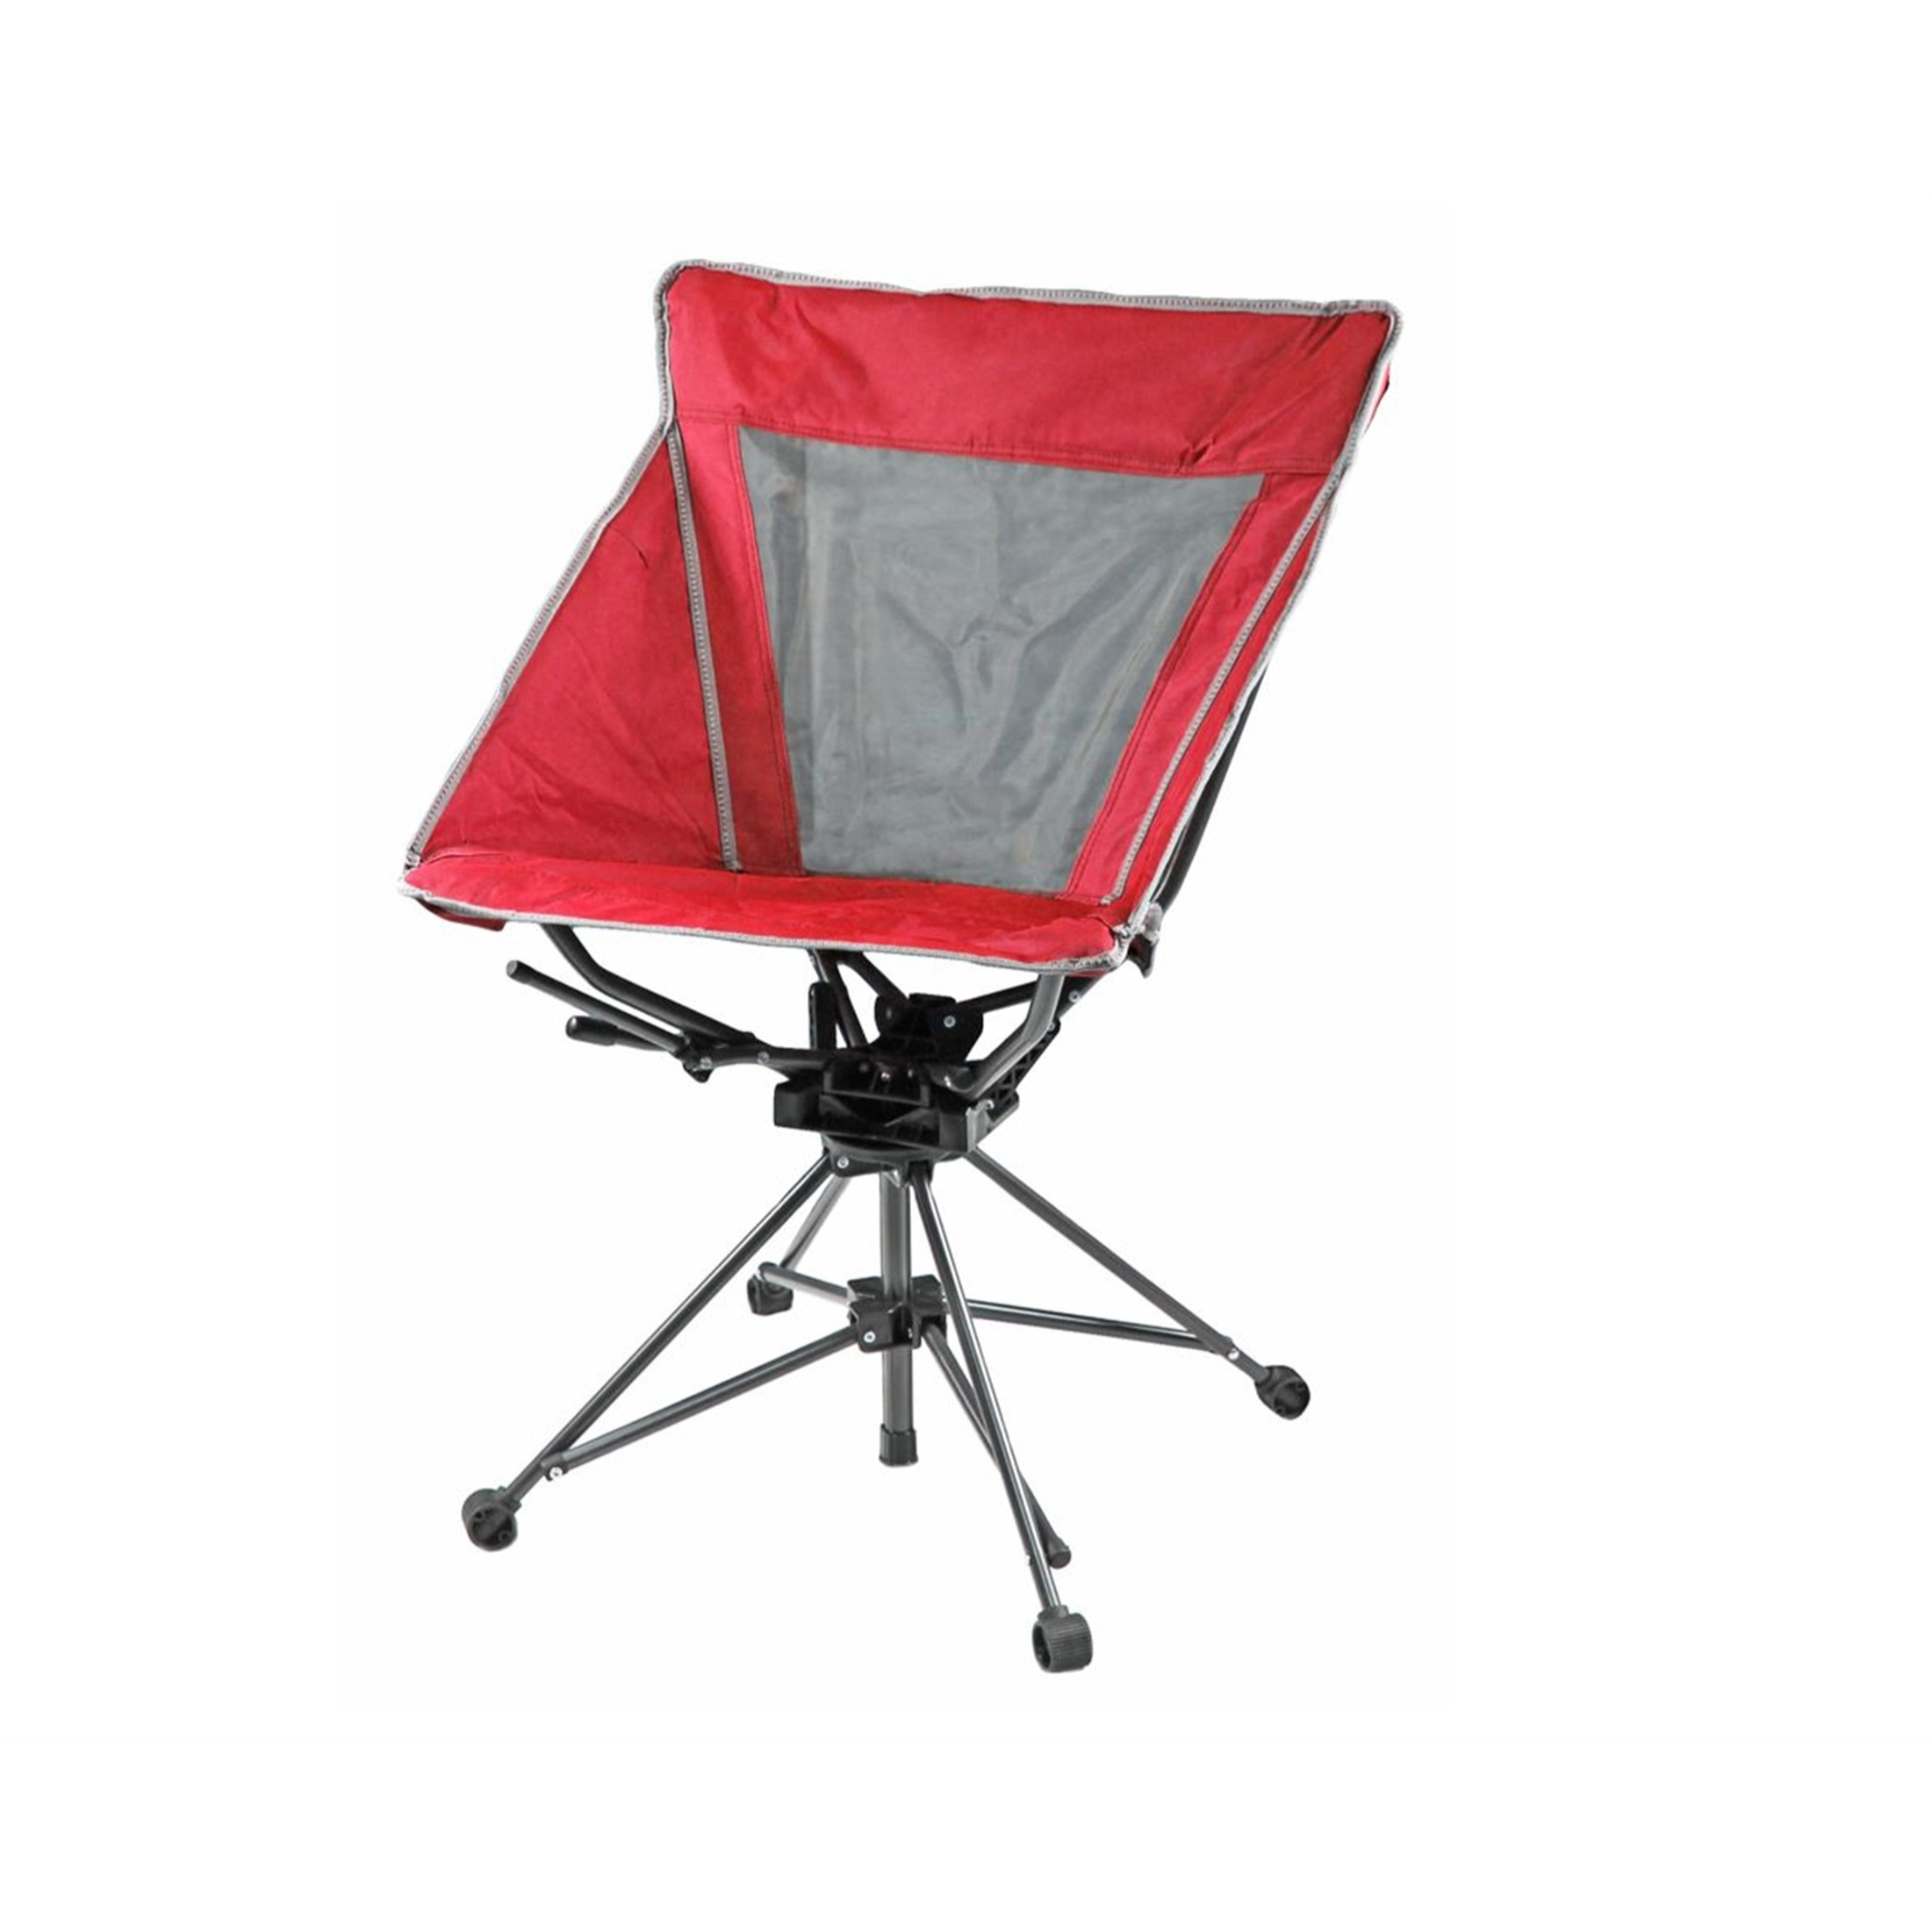 Garden Elements Tall Back Swivel Camping Chair with Mesh Seat